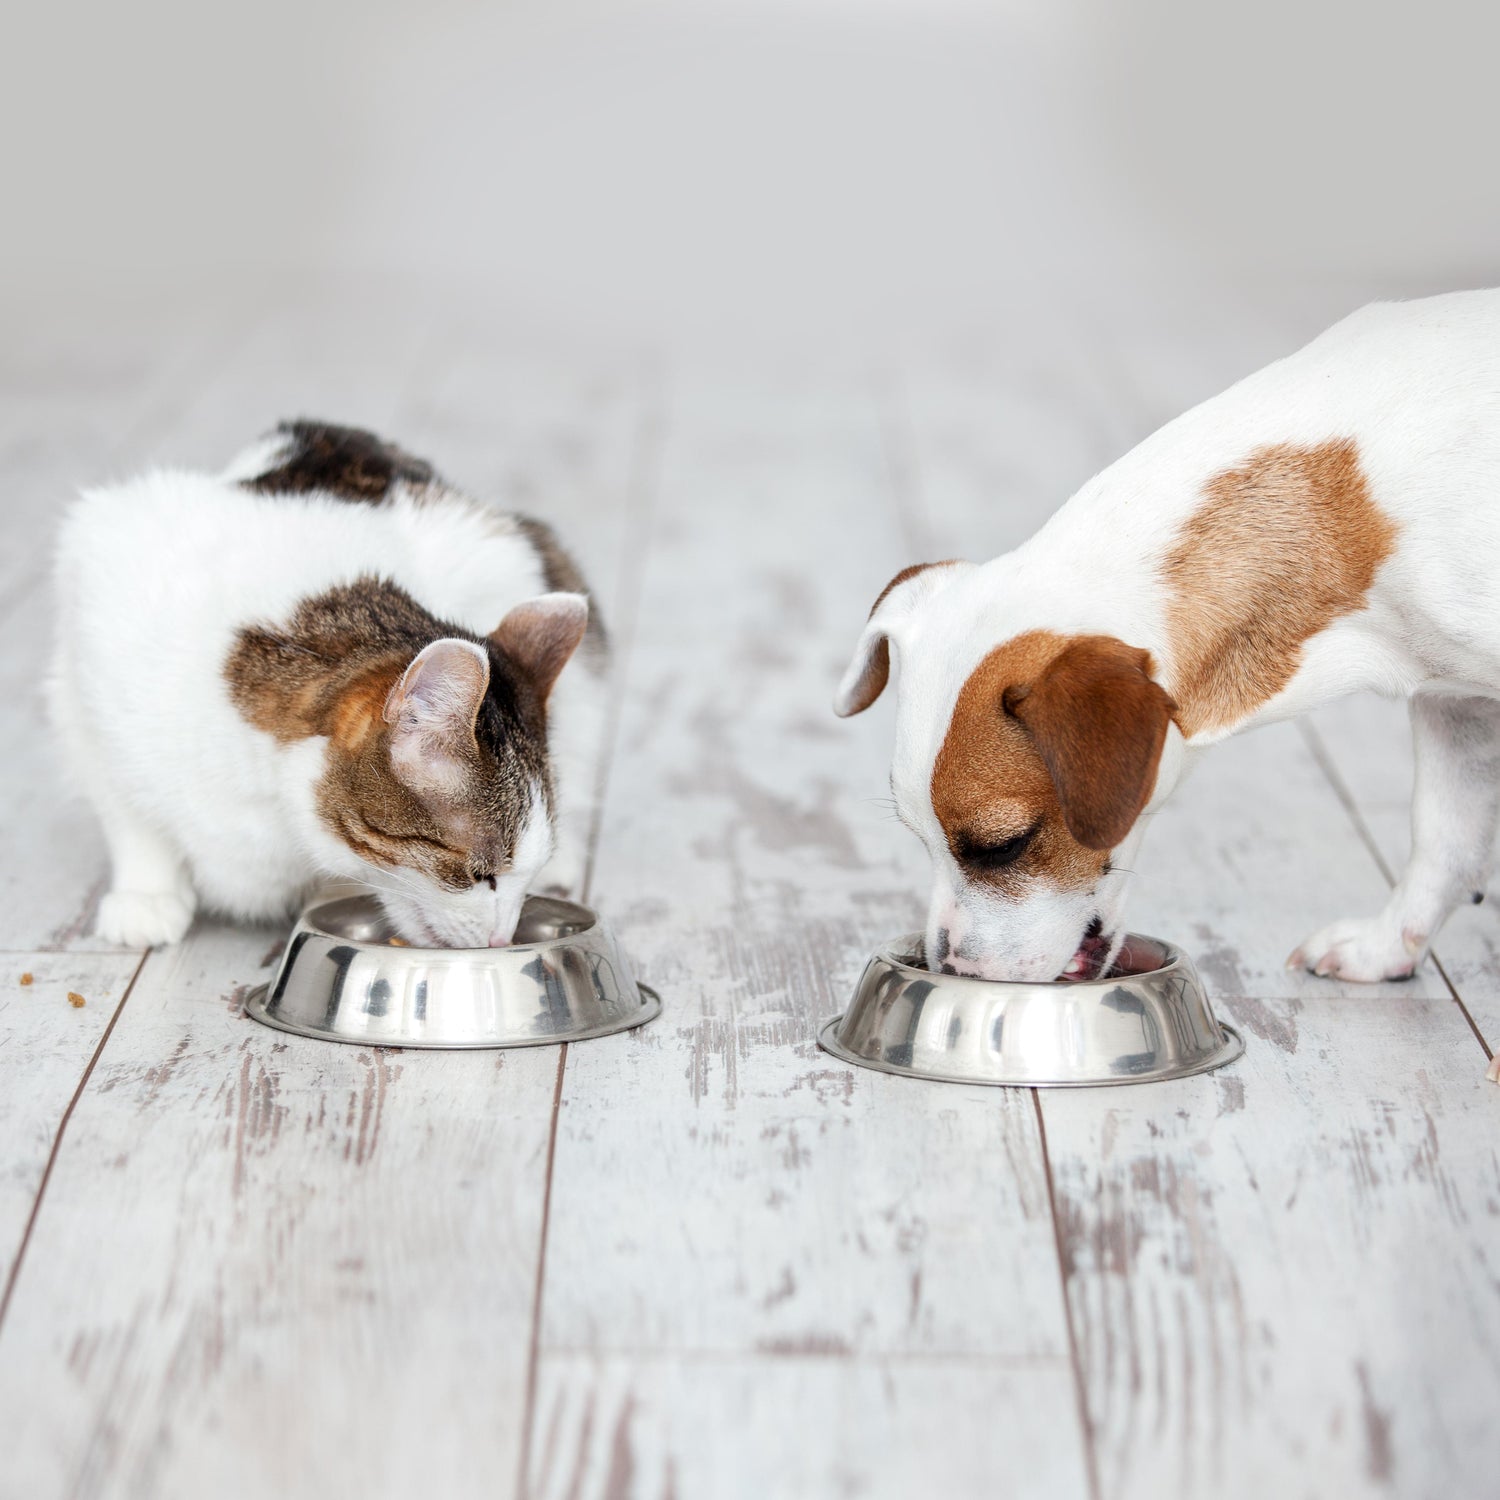 Quality Food Matters: Nutrition Guide for Your Cats and Dogs